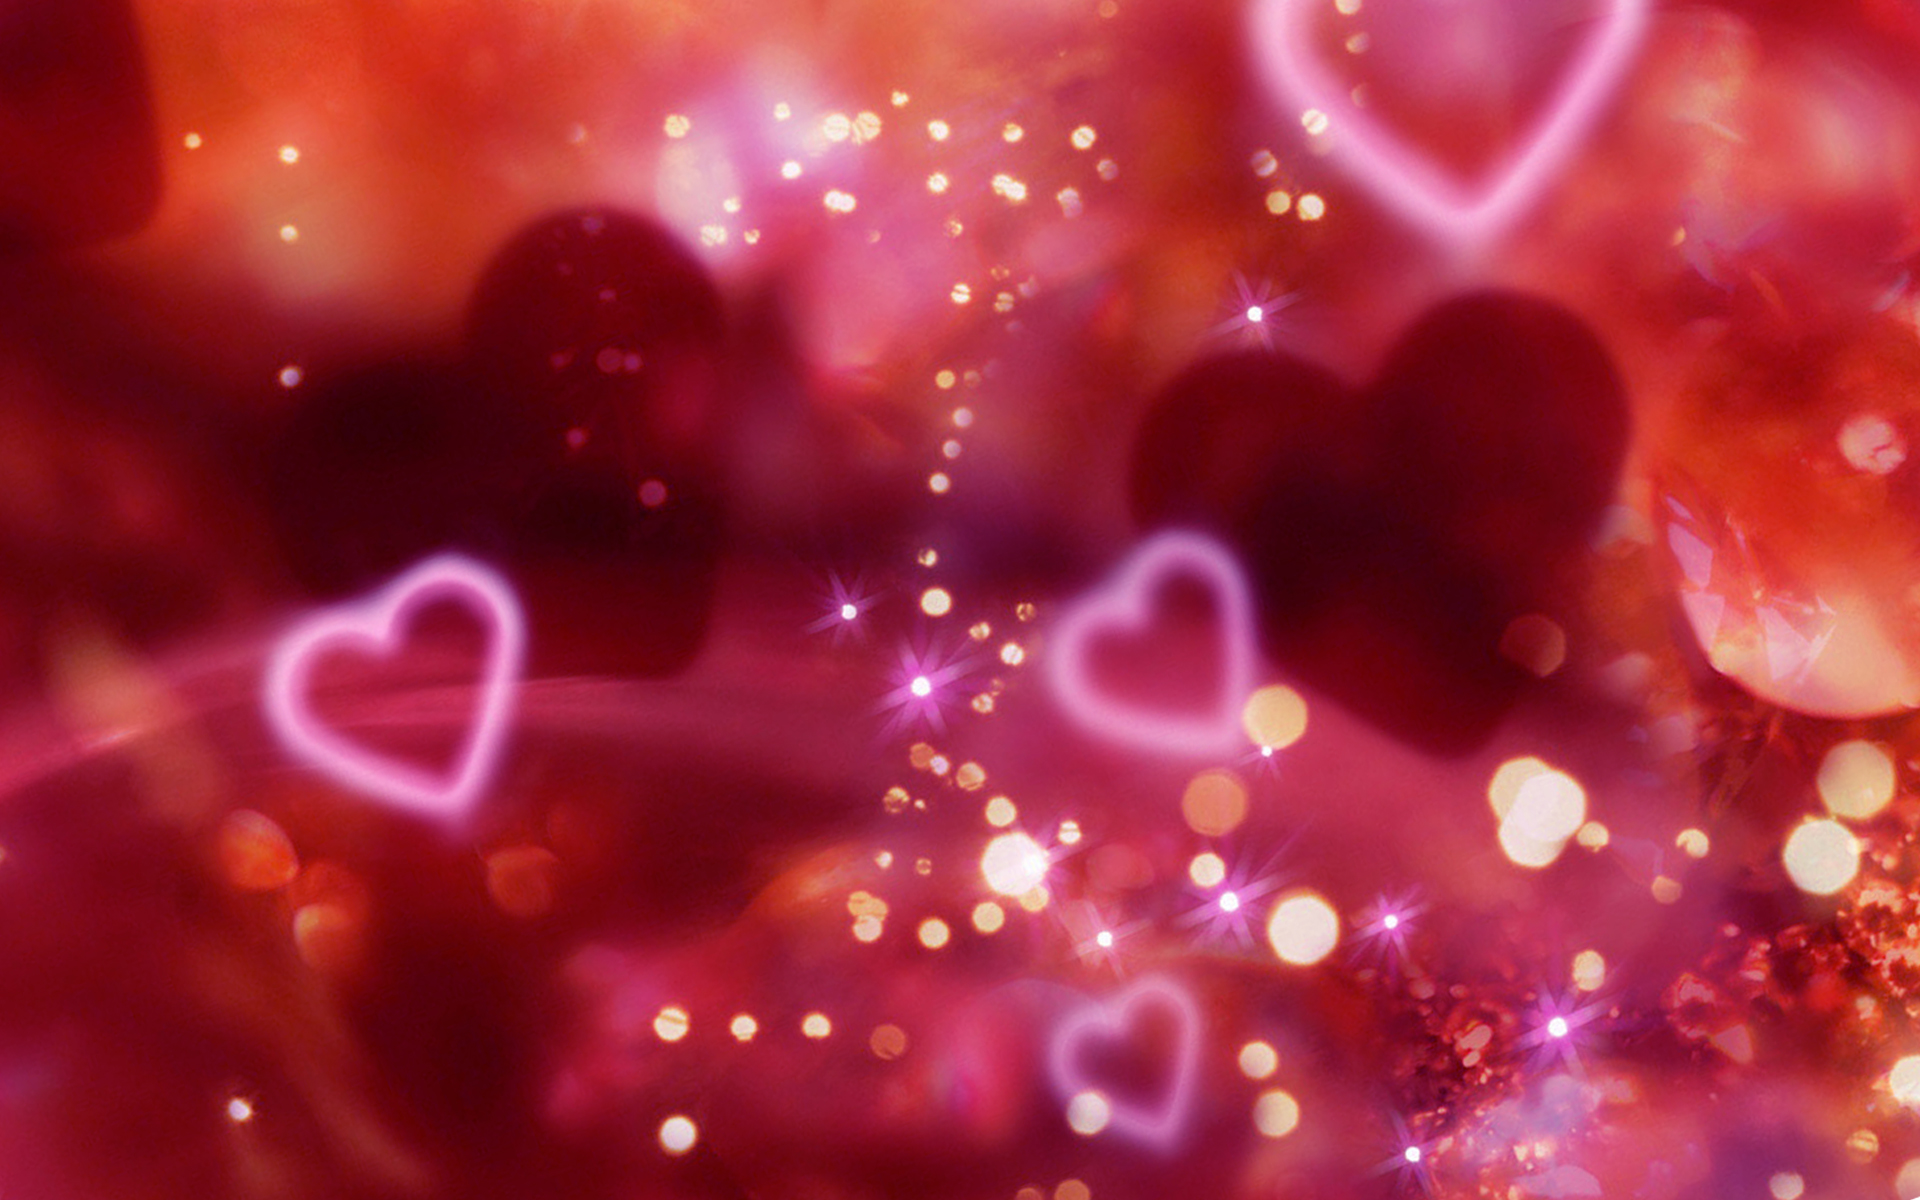 ... valentine-day-love-wallpapers-hearts 2014 ...